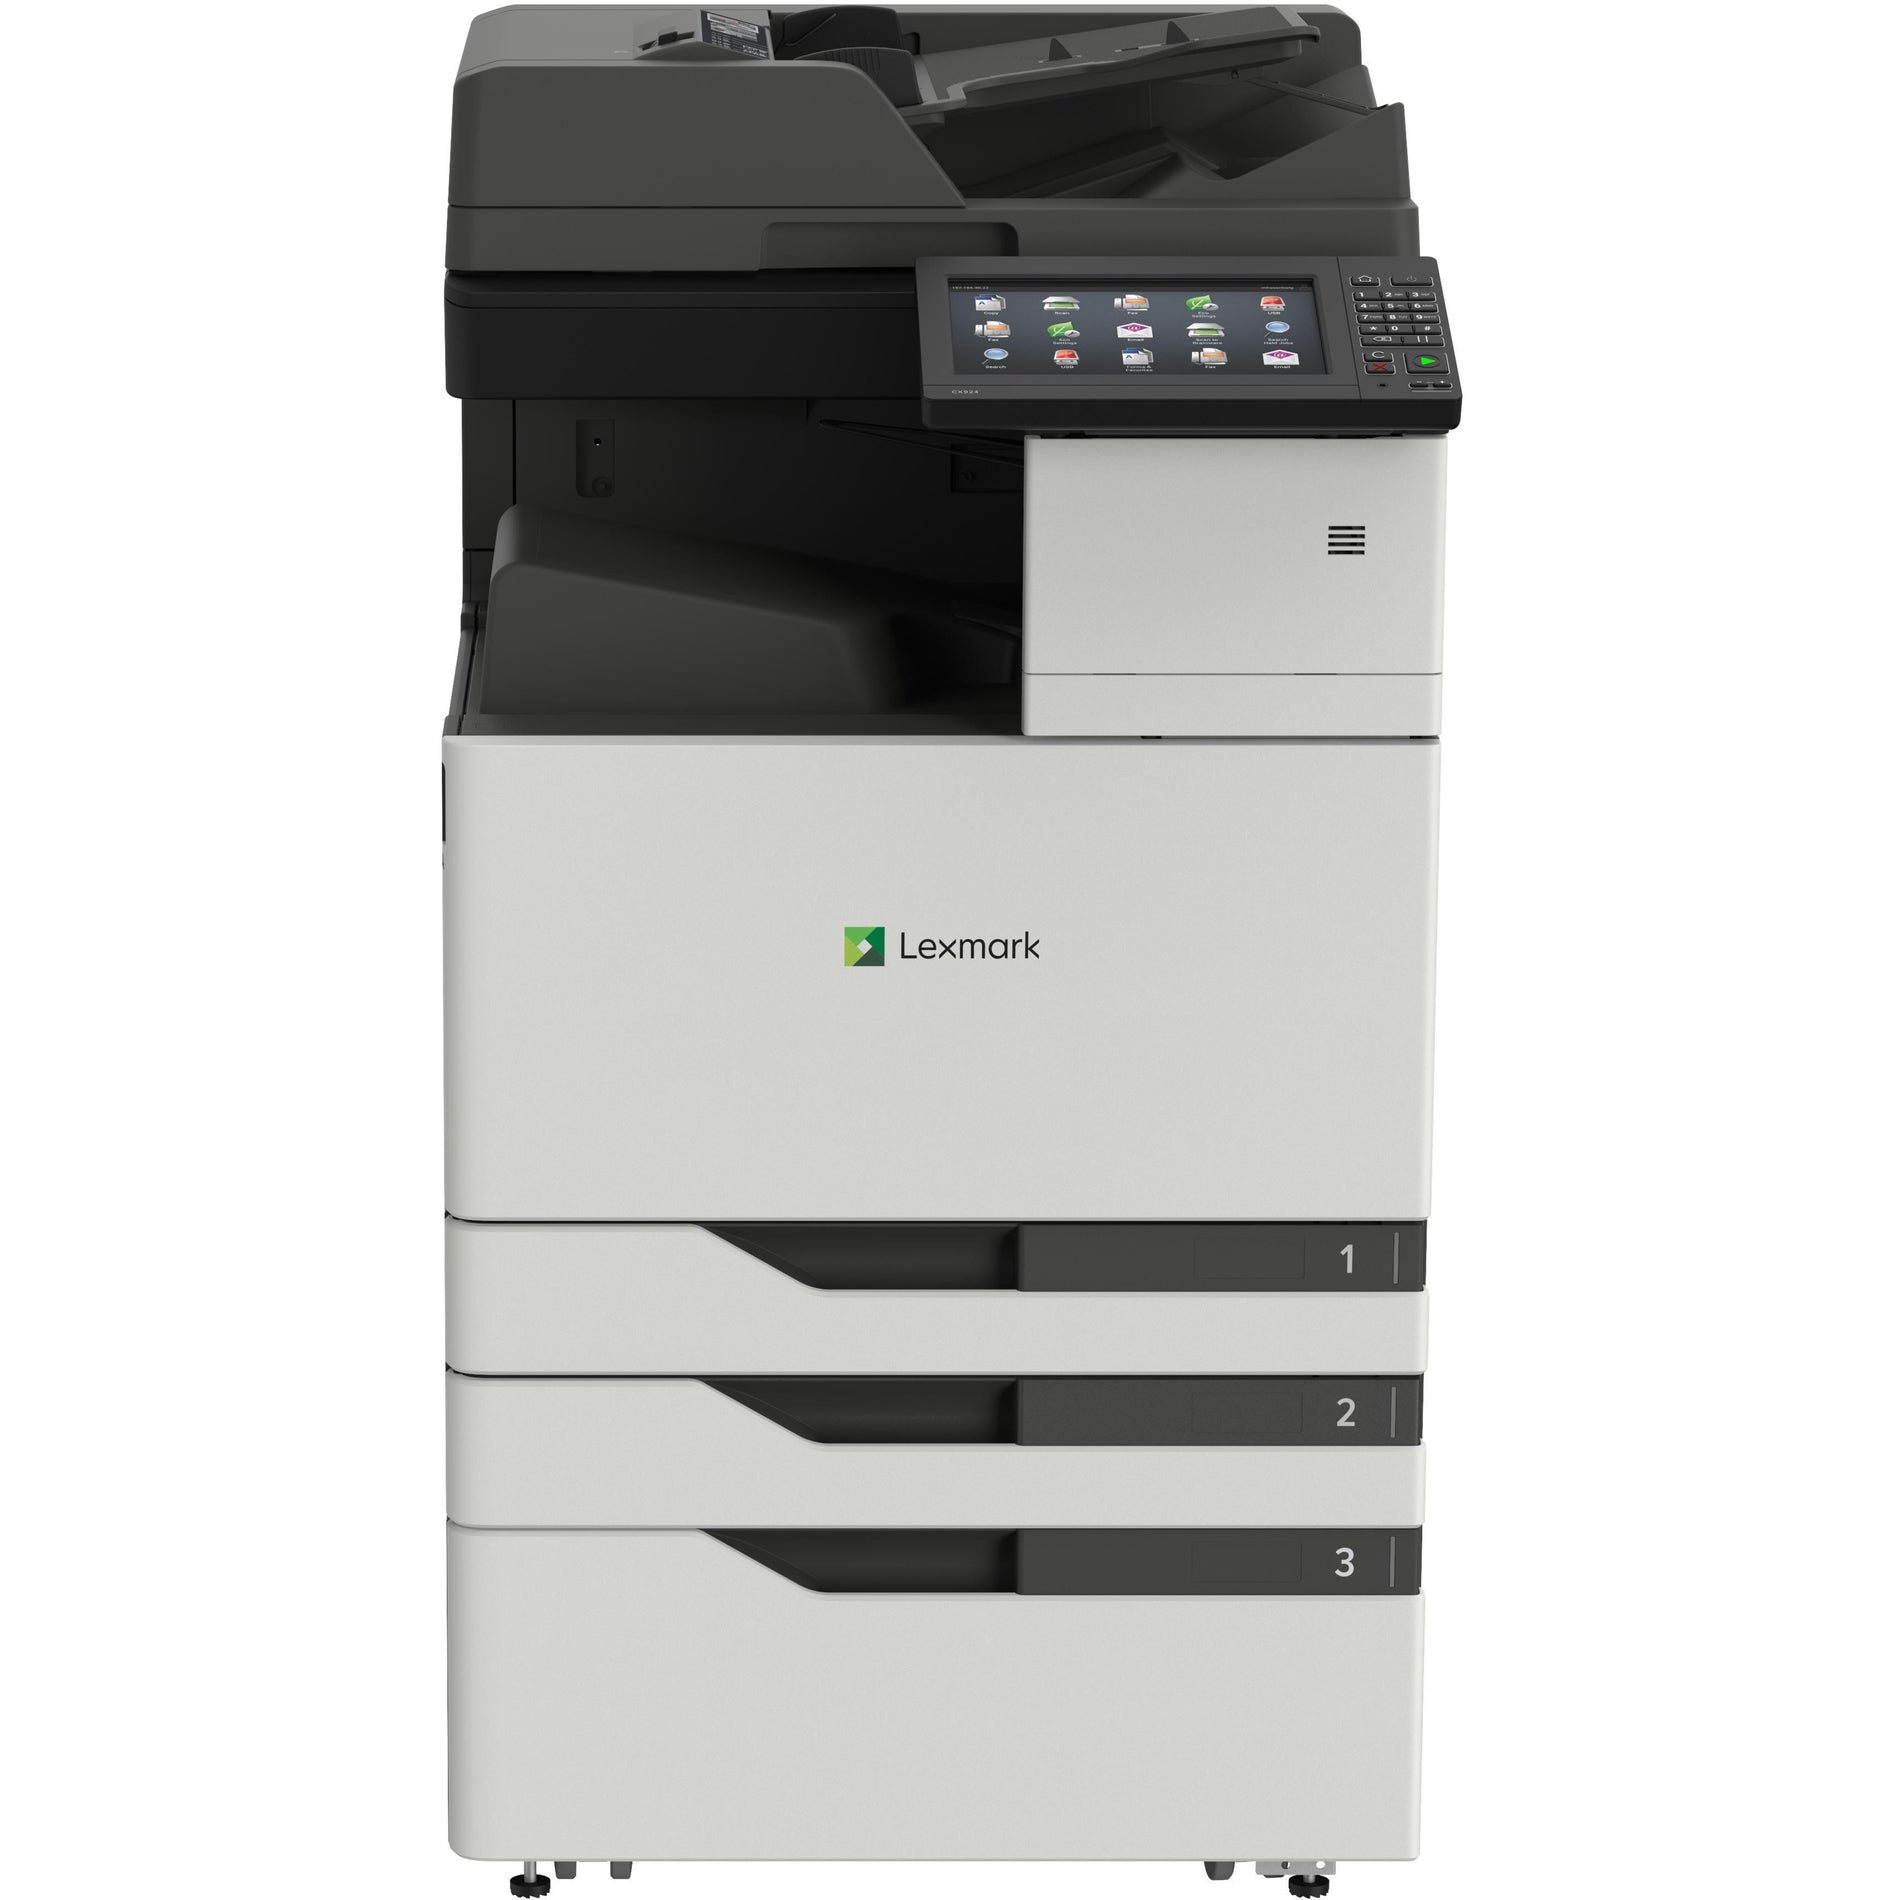 Lexmark 32CT070 CX924dxe Multifunction Color Laser, High-Speed Printing Solution